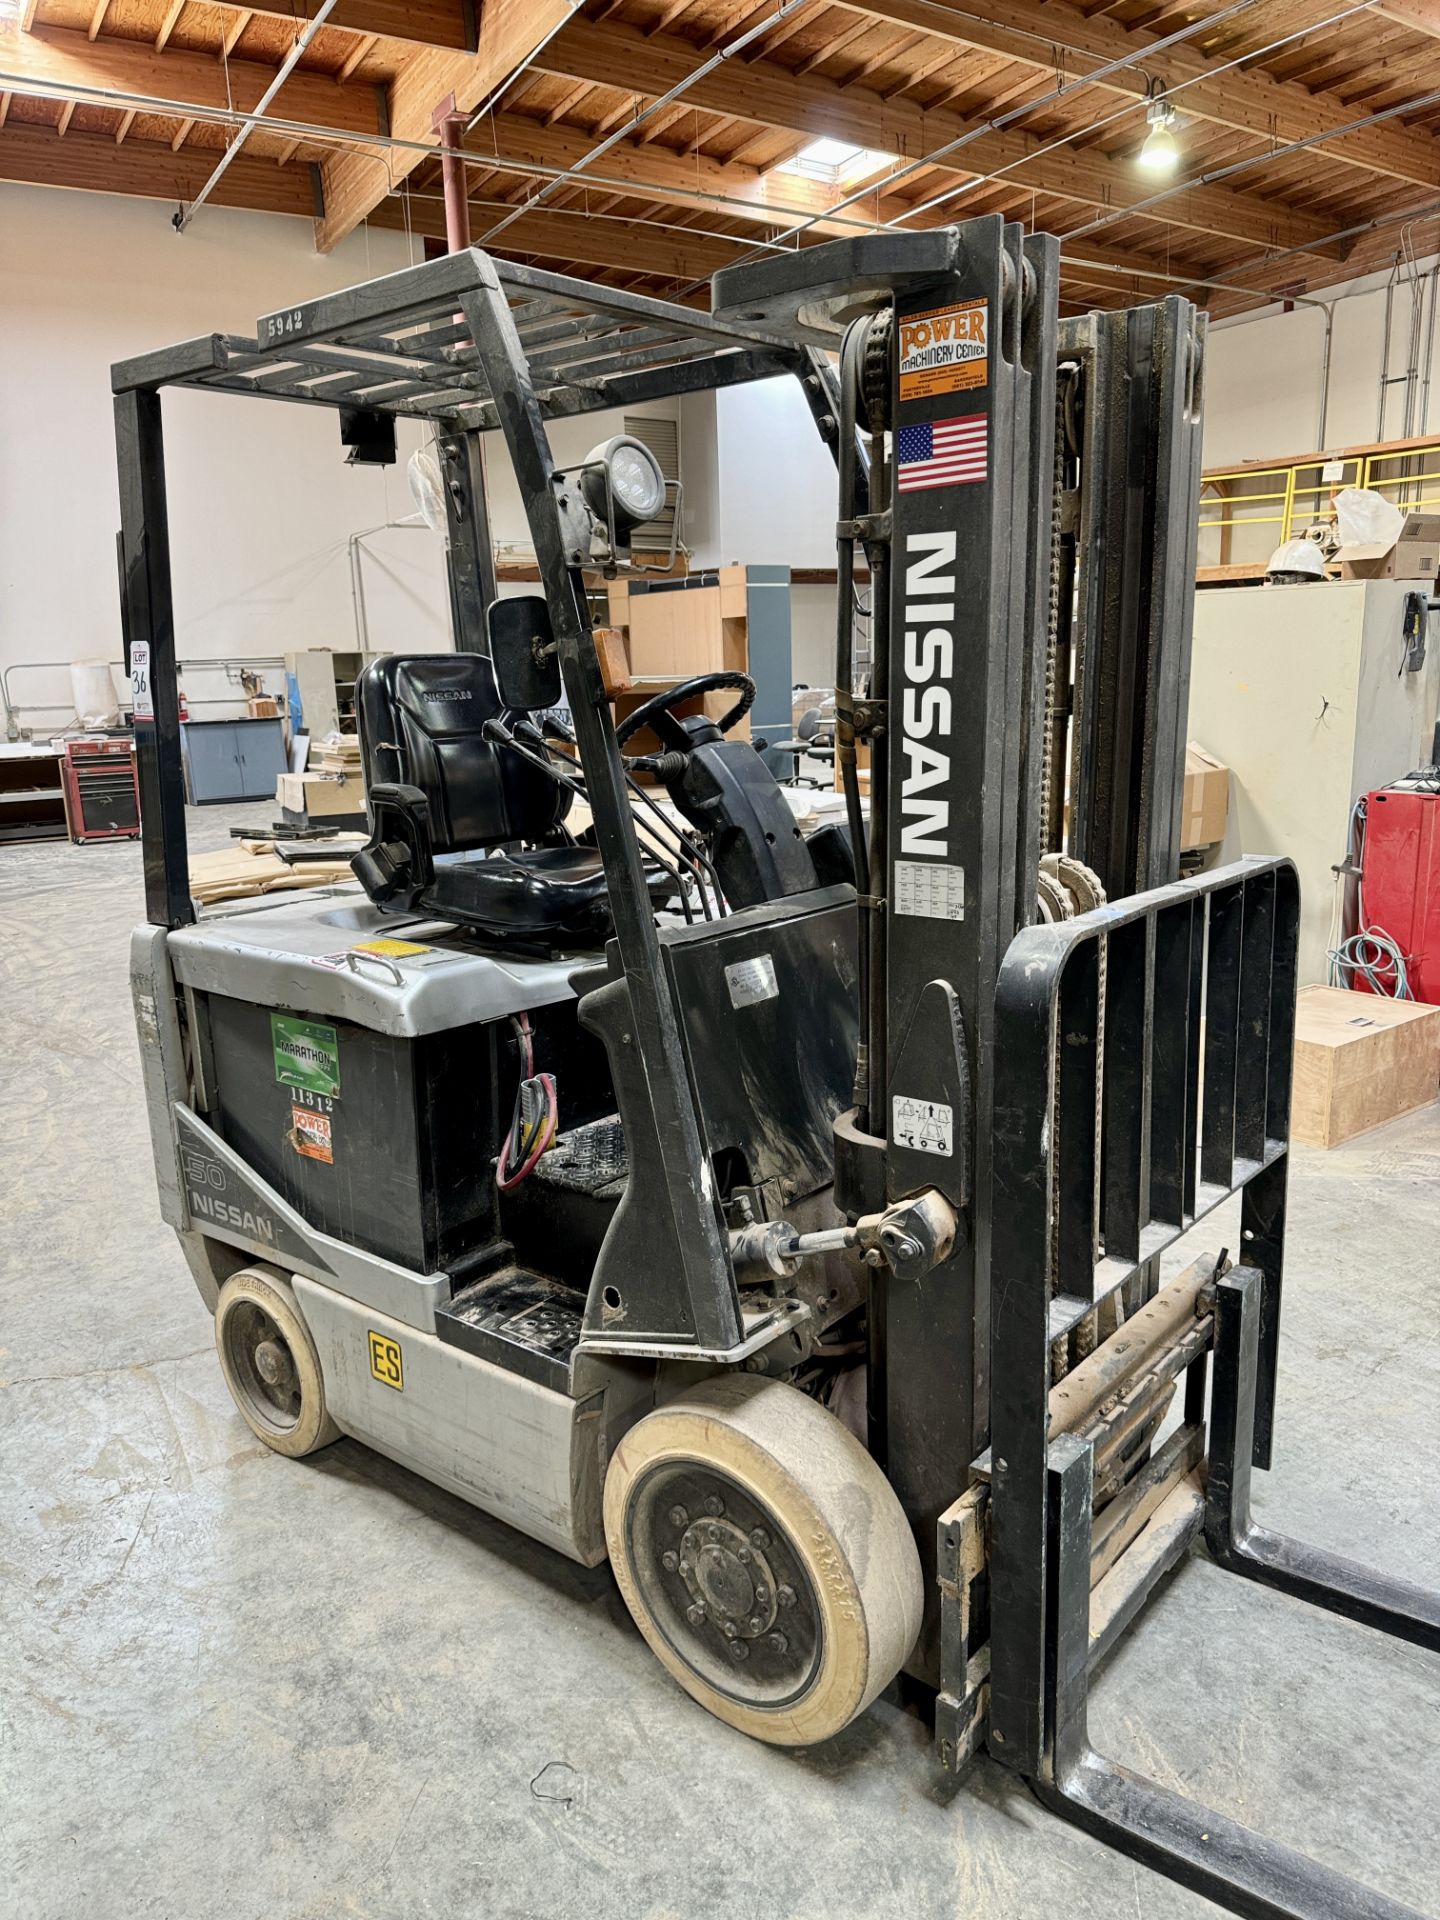 NISSAN ELECTRIC FORKLIFT, MODEL CP1B2L25S, 4,000 LB CAPACITY, 3-STAGE MAST, SIDE SHIFT, SOLID TIRES,